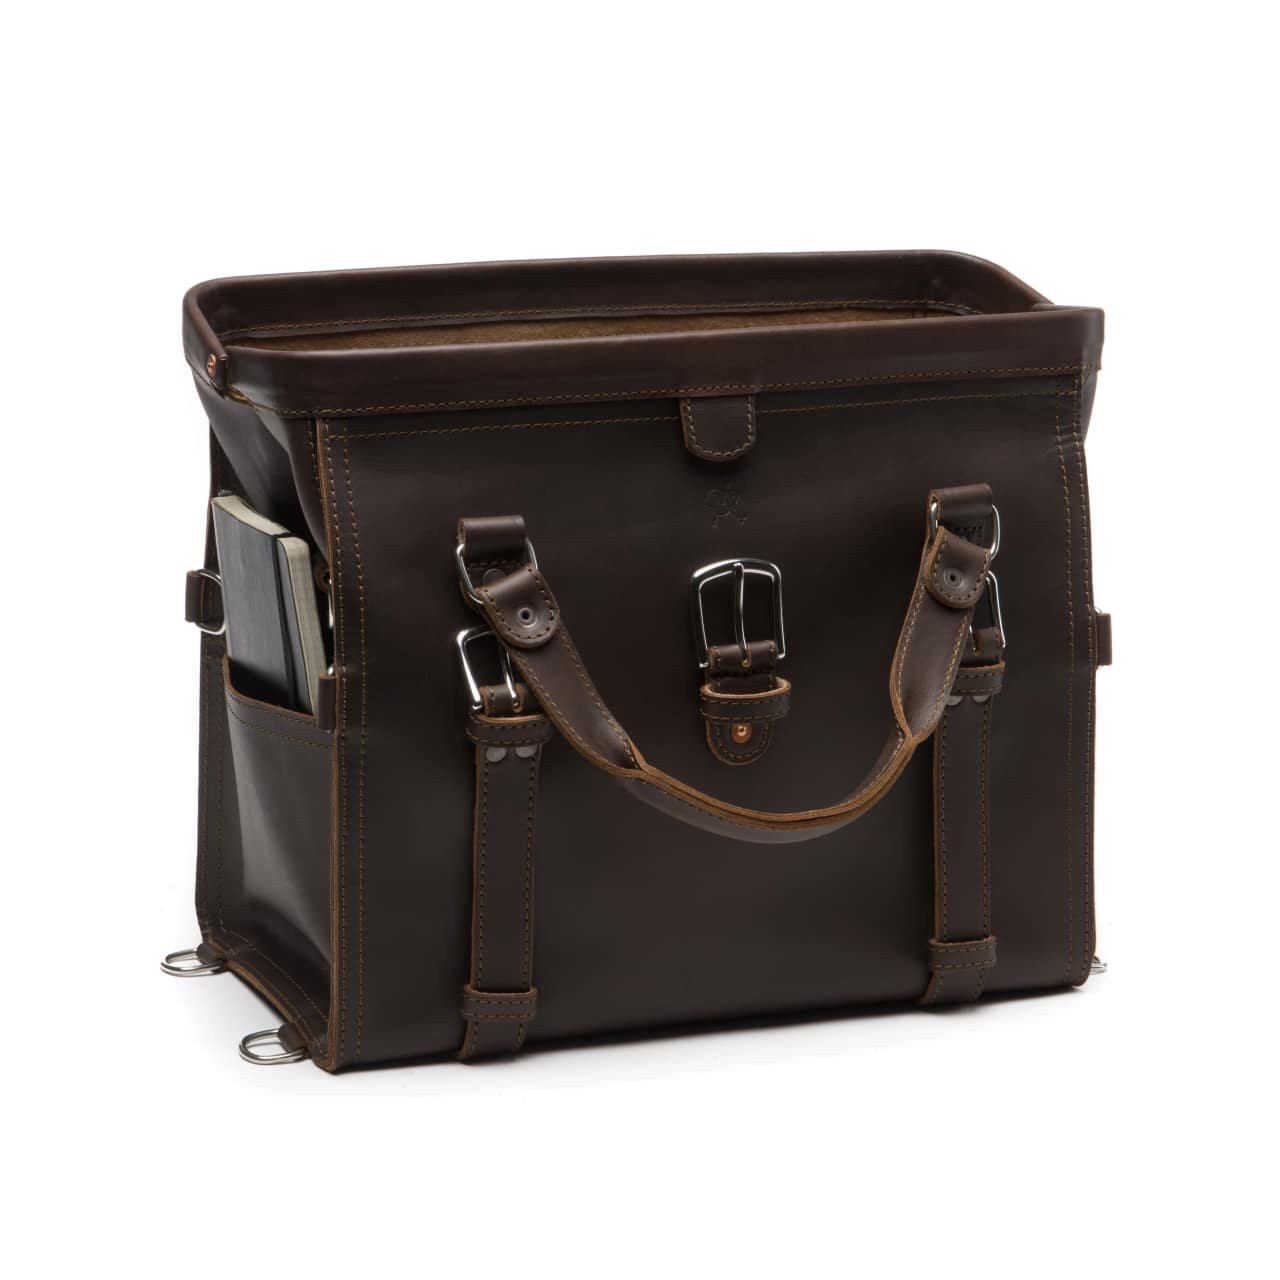 Gladstone (Old Timey Doctor) Bags - Five Plus One